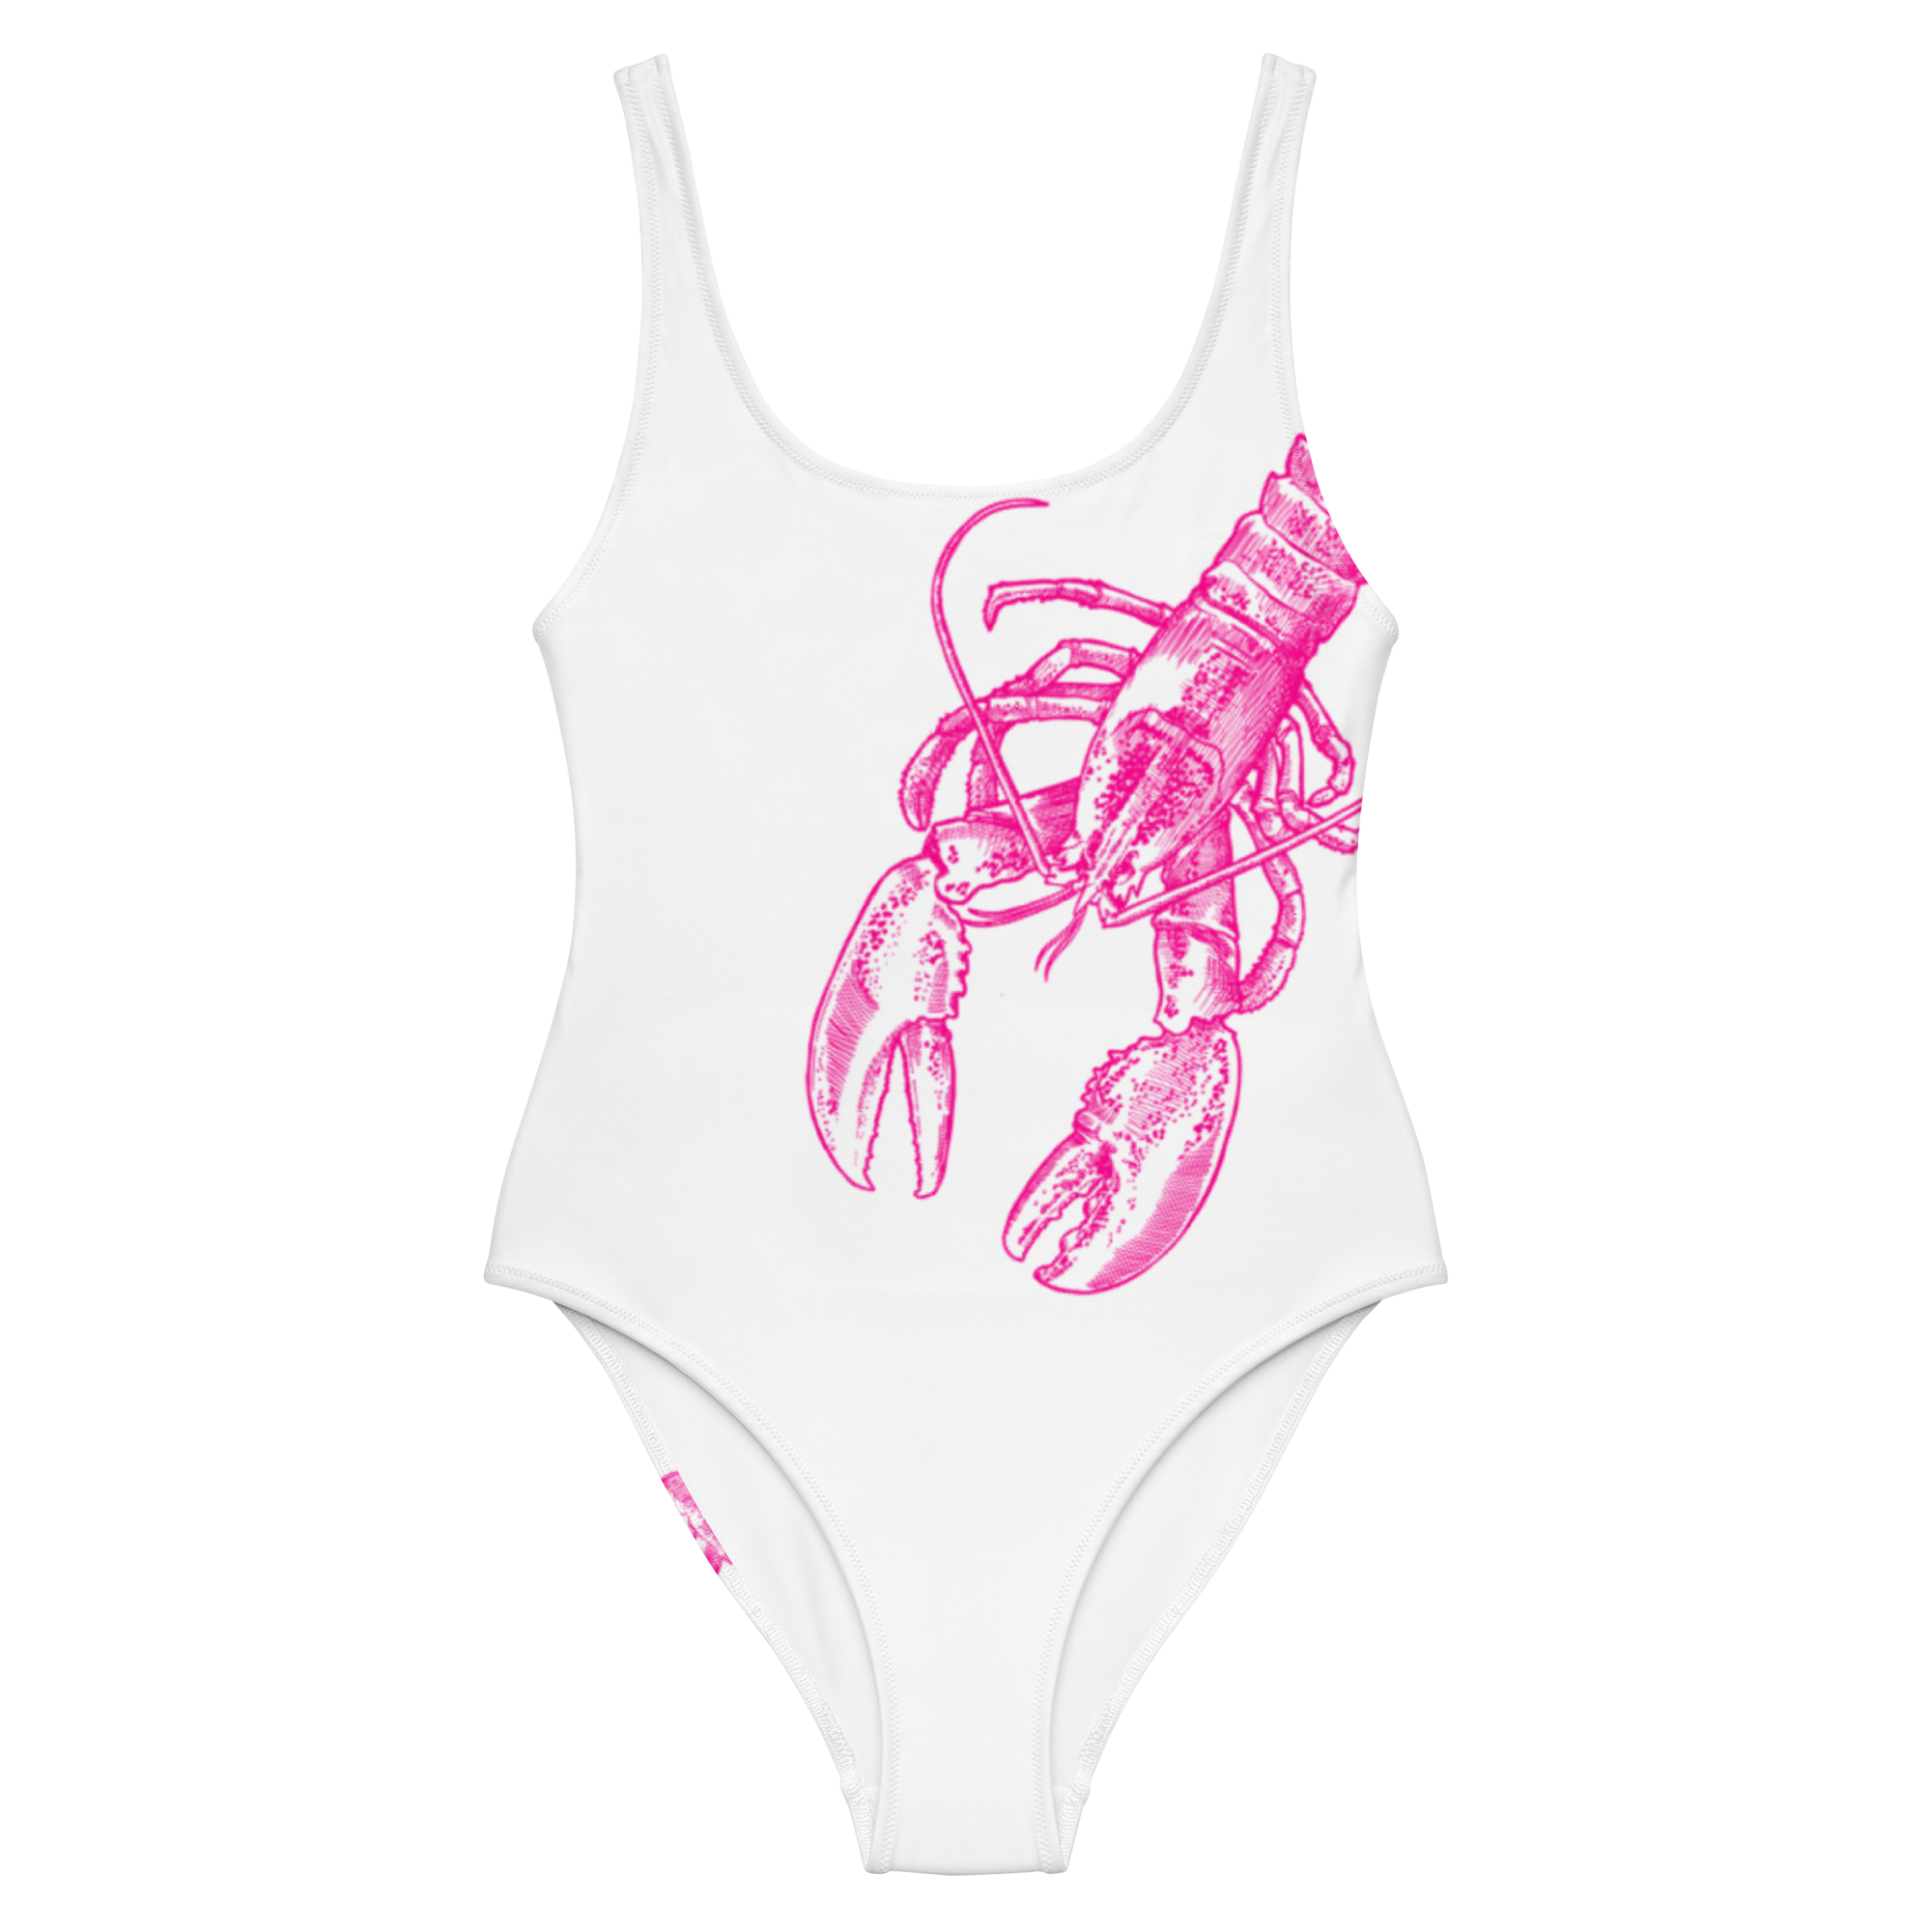 Pink Lobster One-Piece Swimsuit